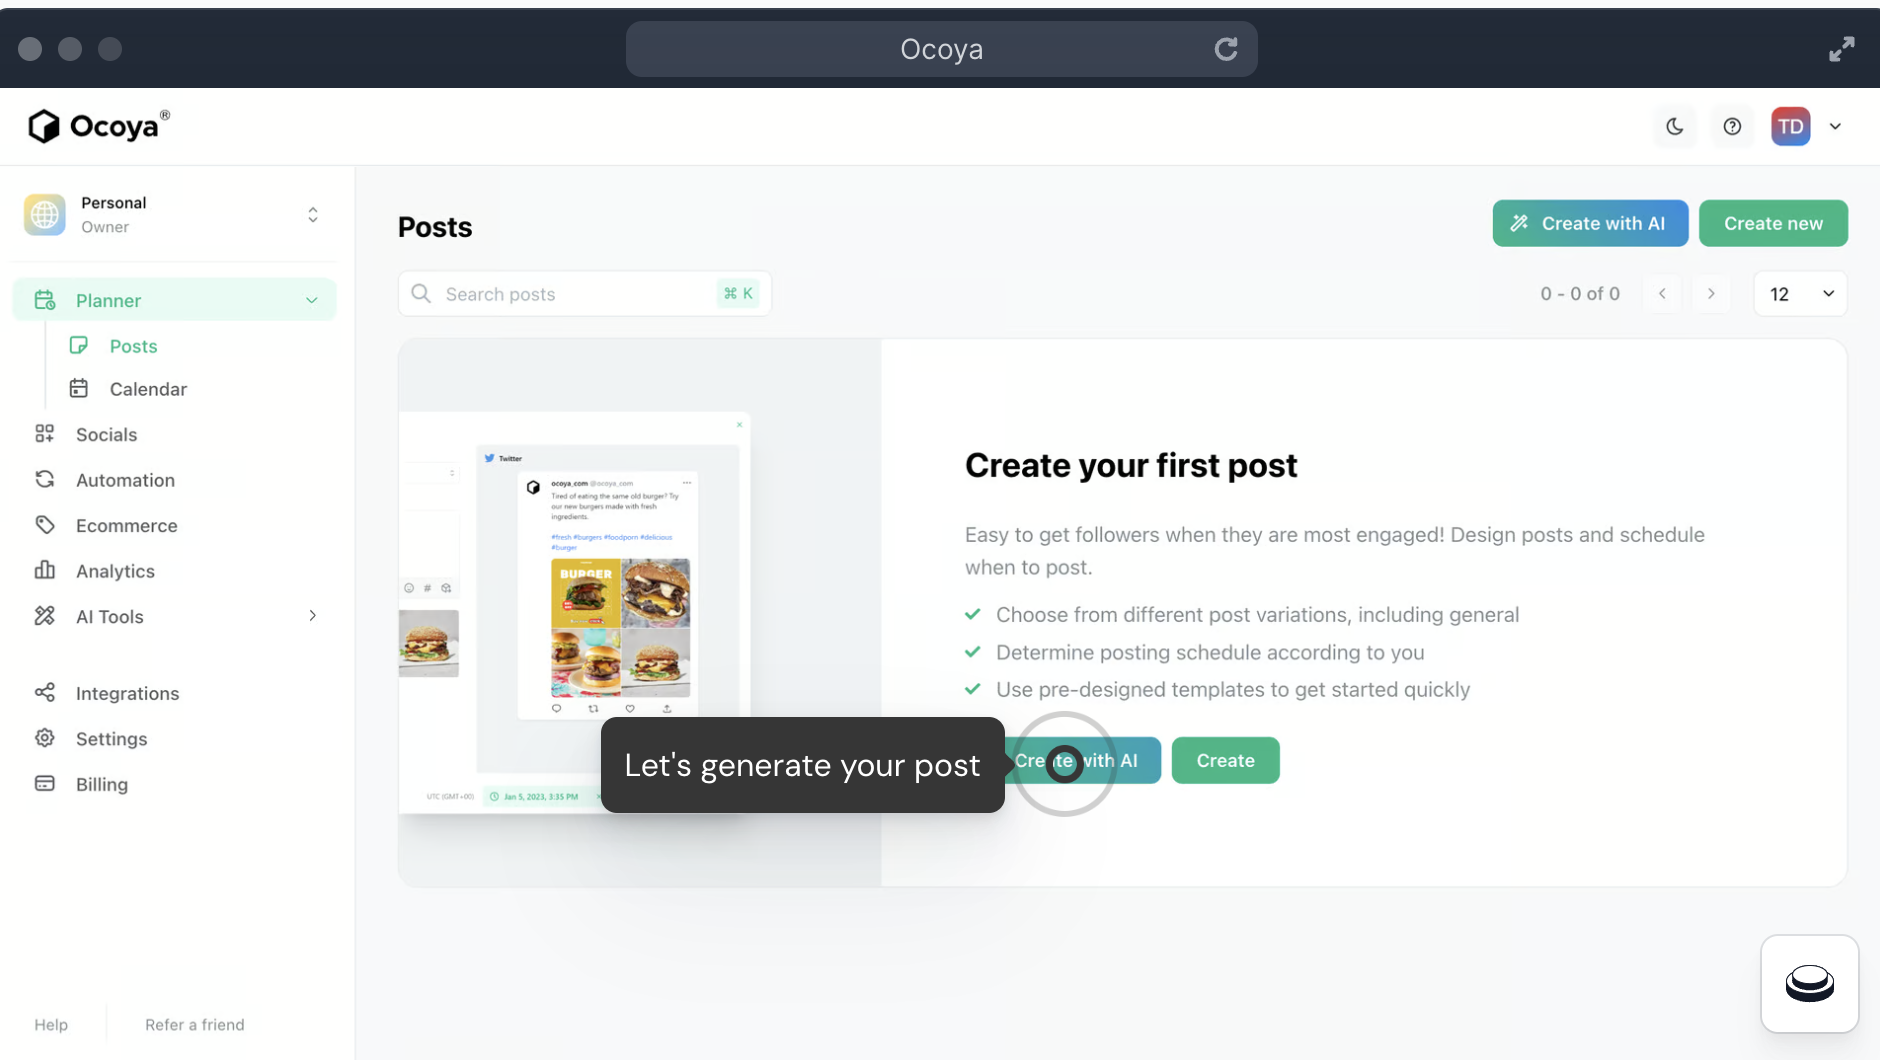 ocoya window inviting you to "create your first post" and a cursor highlighting the button to "Create with AI"